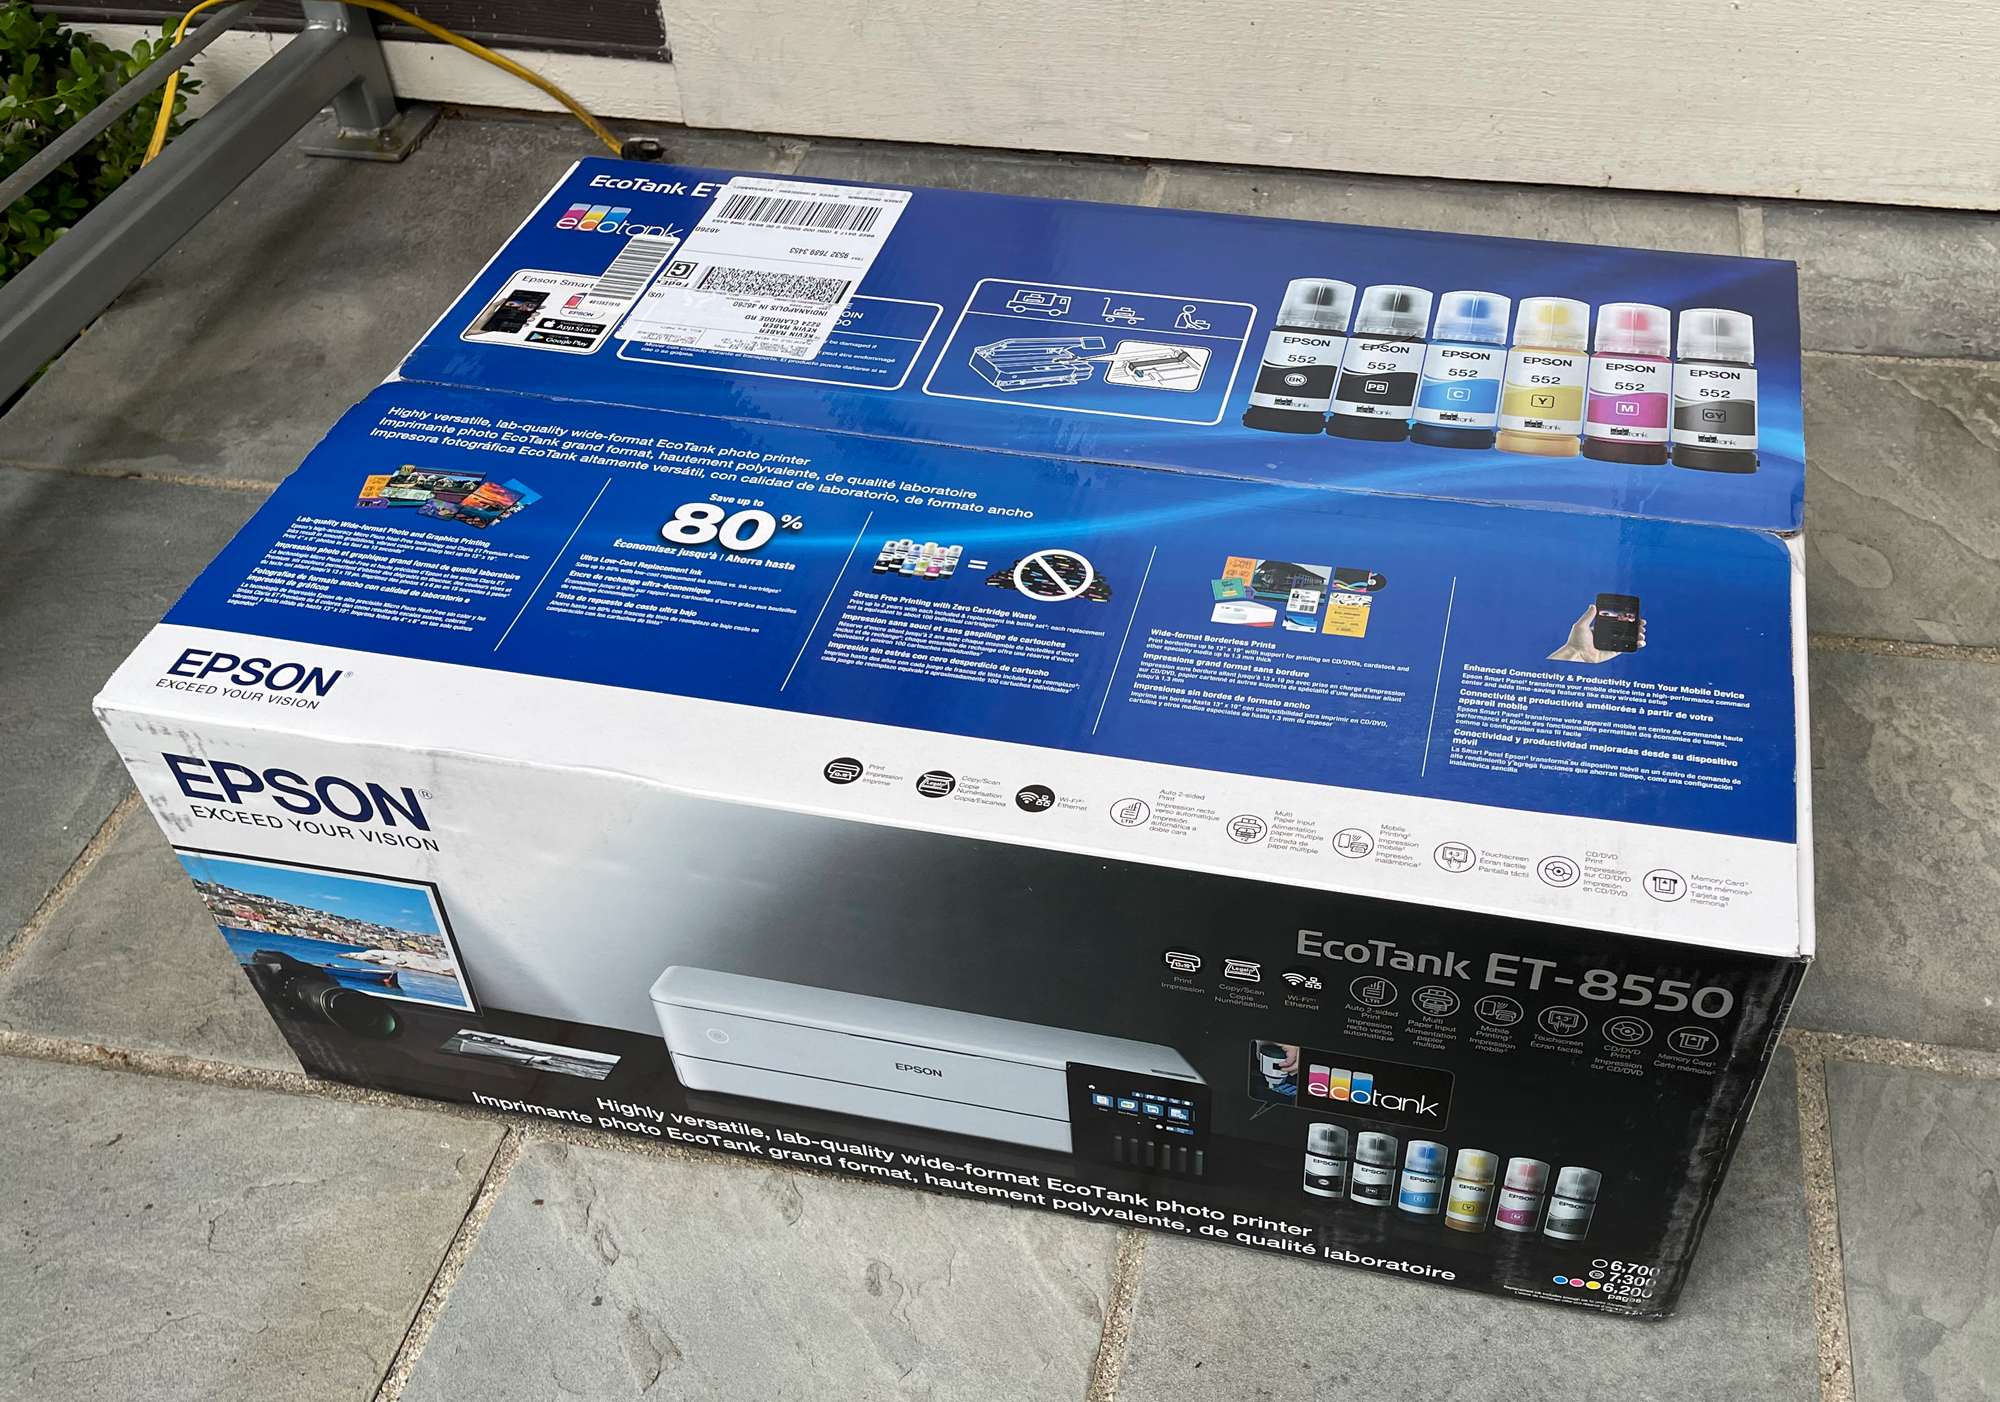 Epson surecolor p700 transparency paper printing help. : r/Epson